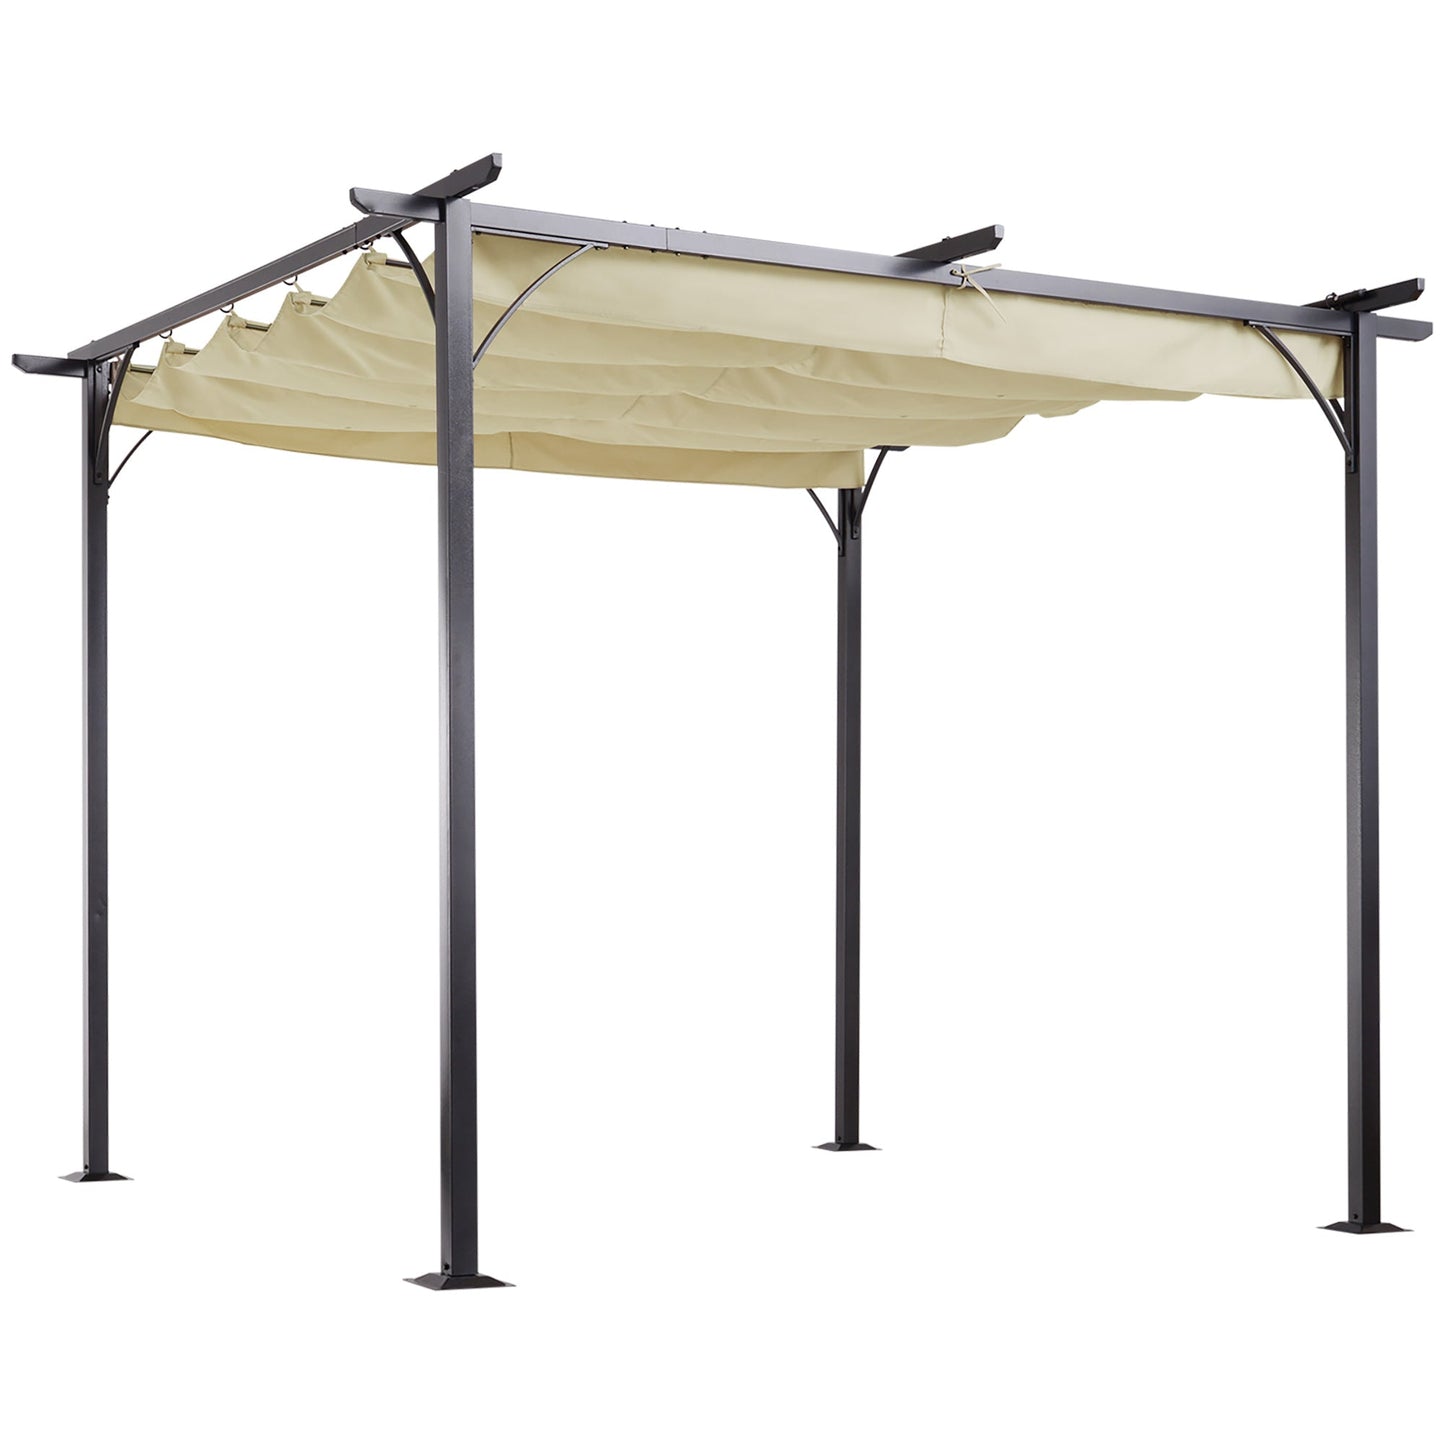 Outdoor and Garden-10' x 10' Retractable Patio Gazebo Pergola with UV Resistant Outdoor Canopy & Strong Steel Frame Beige - Outdoor Style Company